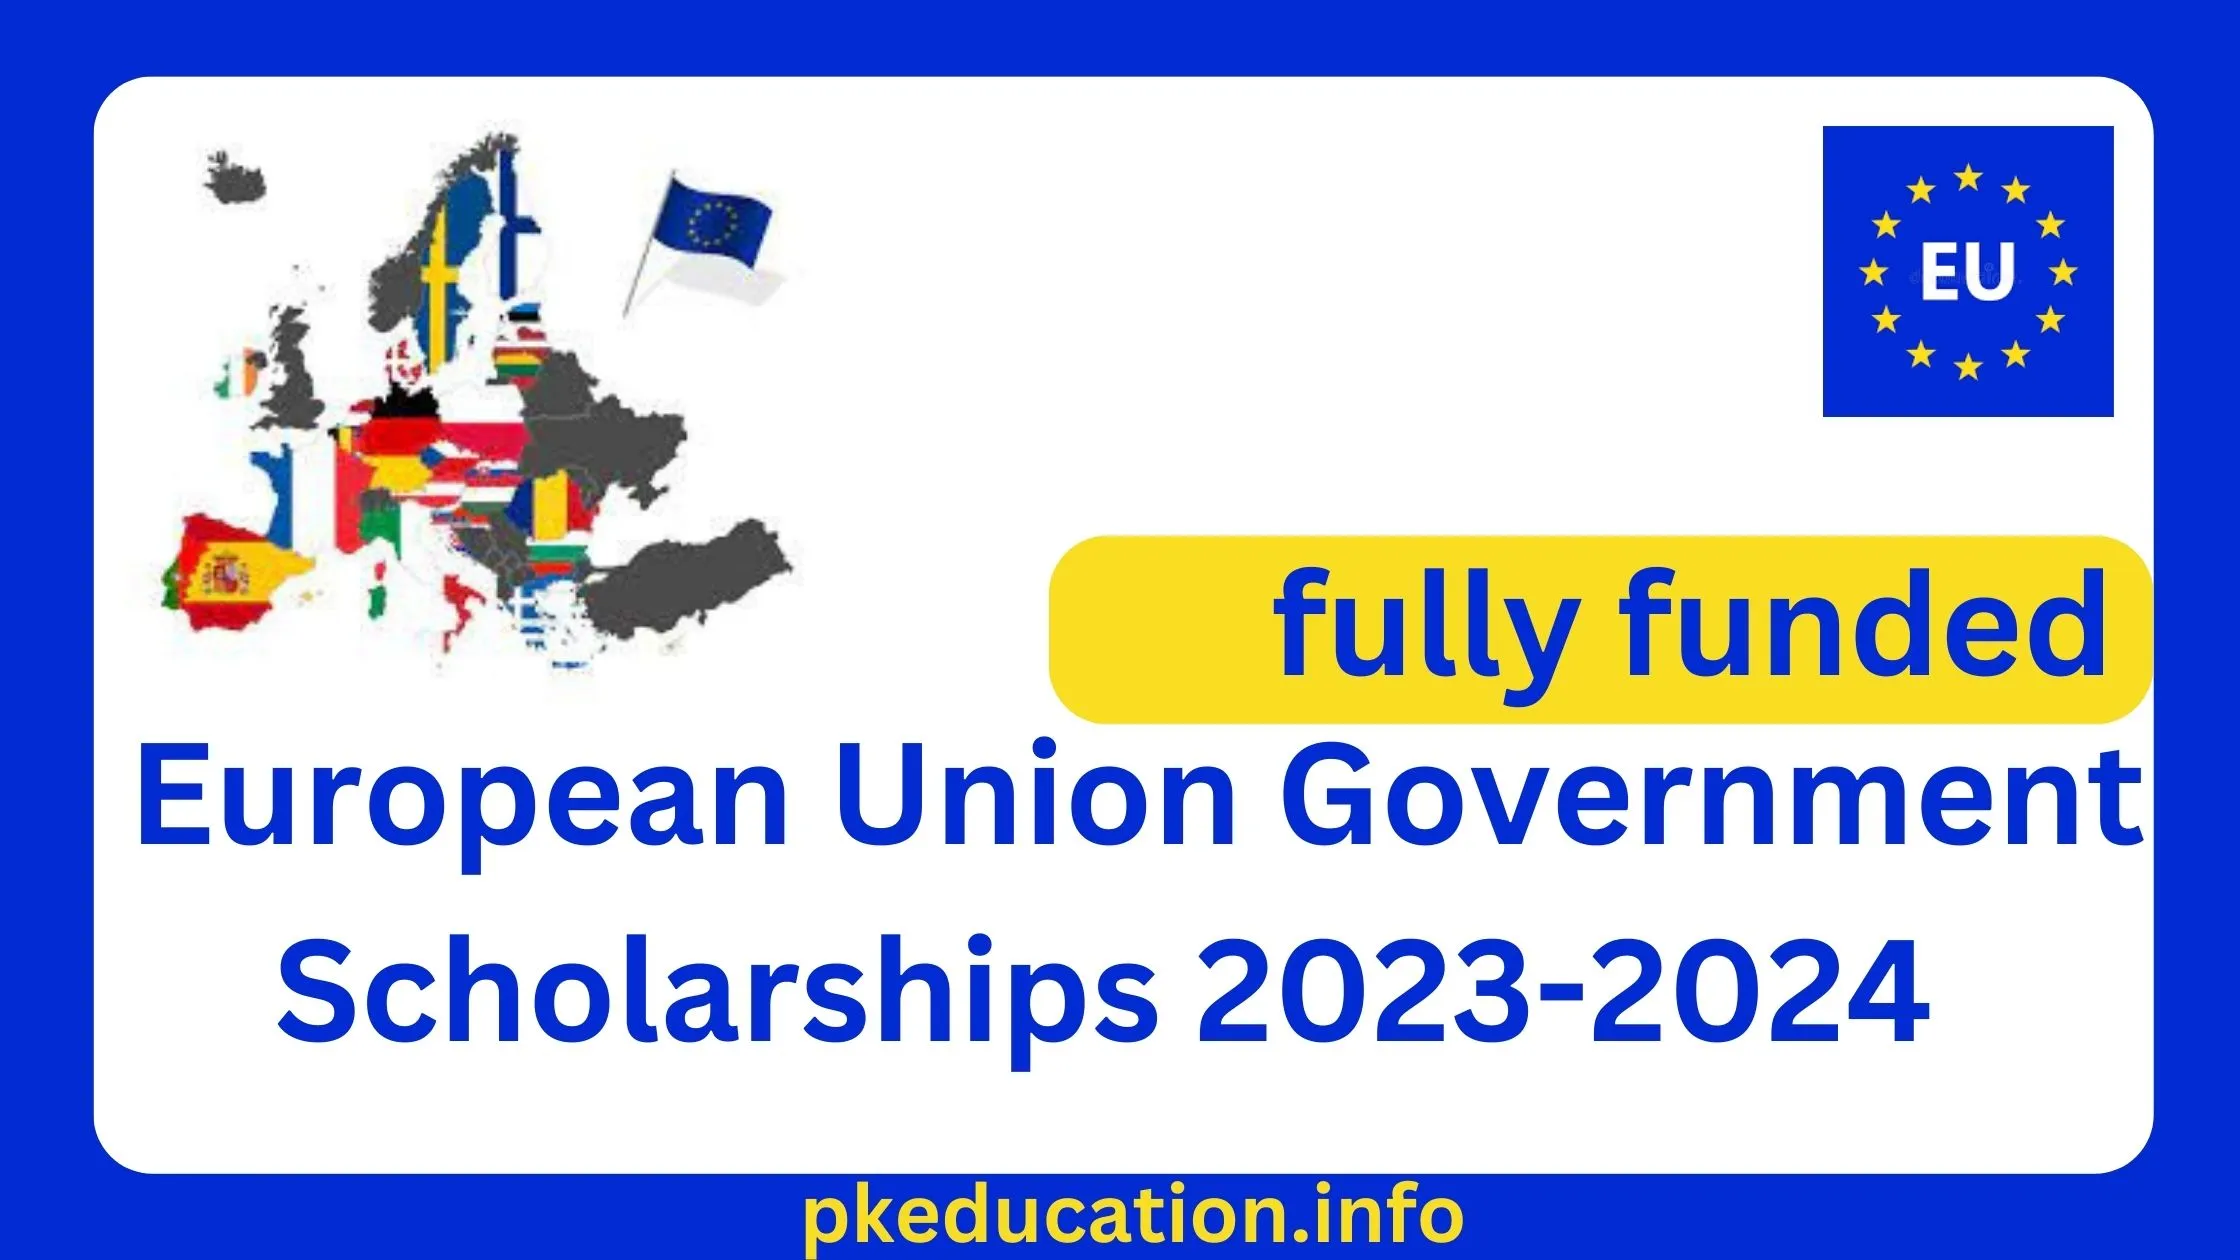 European Union Government Scholarships 2023-2024 (Fully Funded)